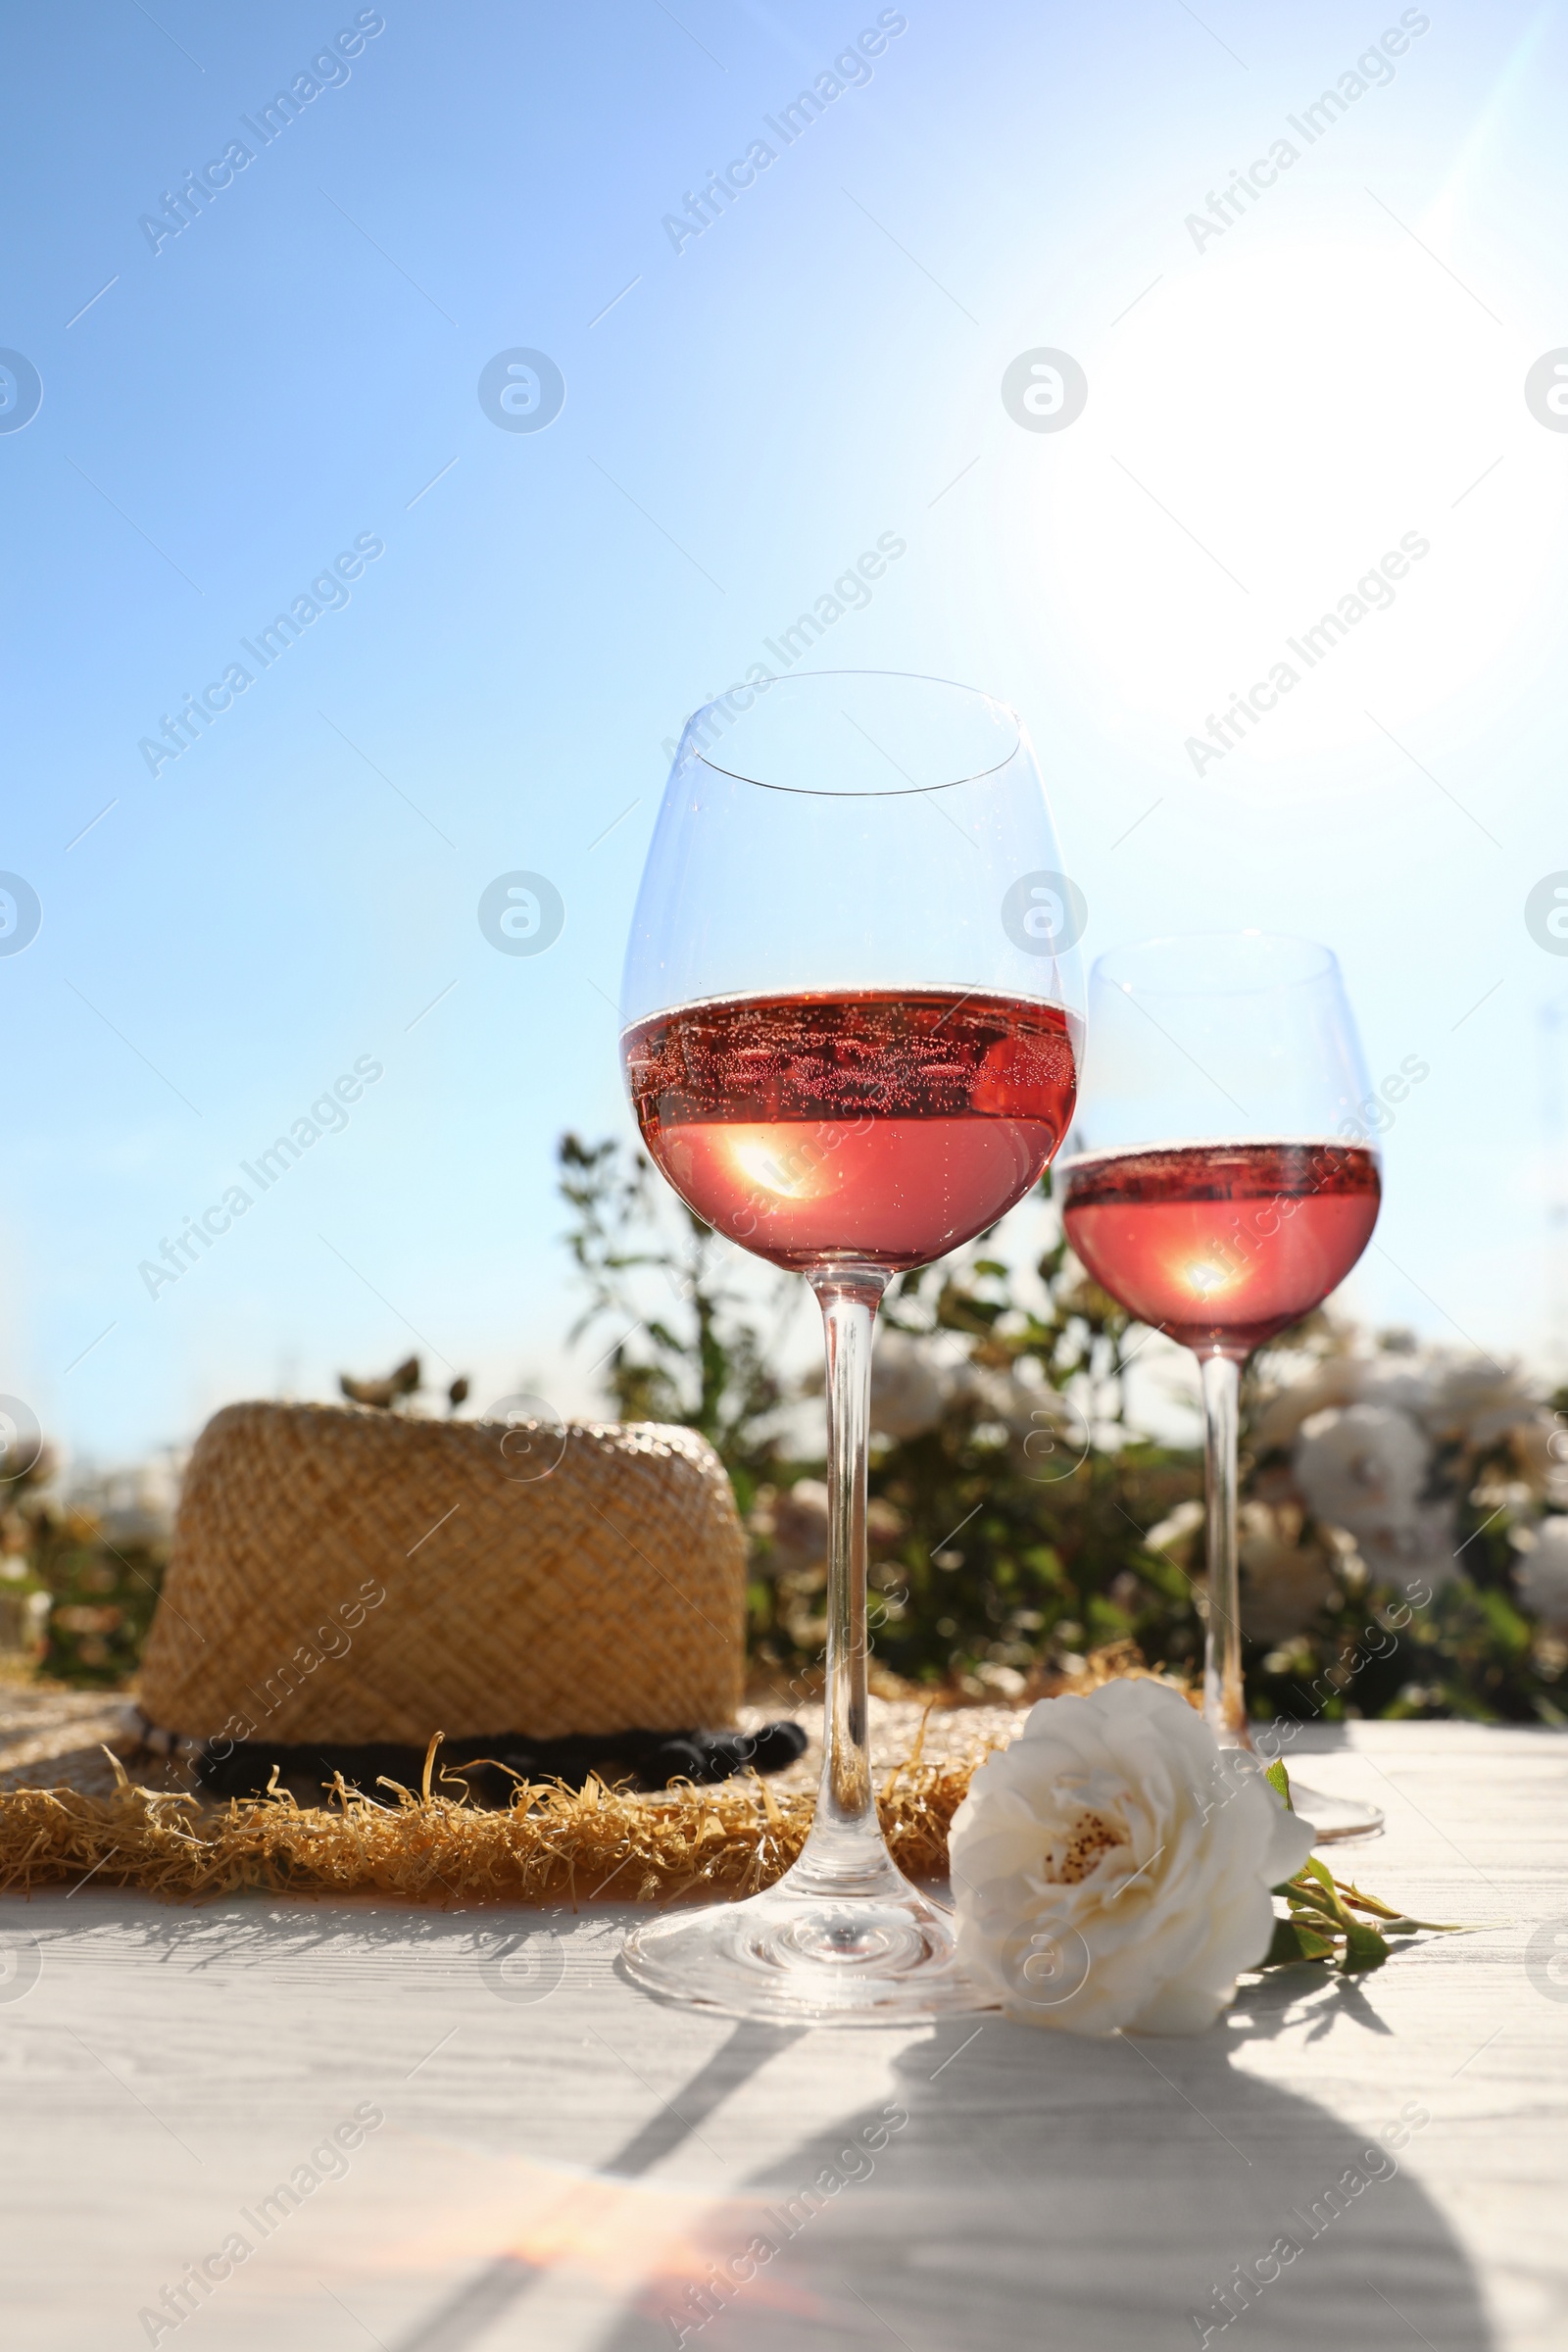 Photo of Glasses of rose wine, straw hat and beautiful flower on white wooden table outdoors